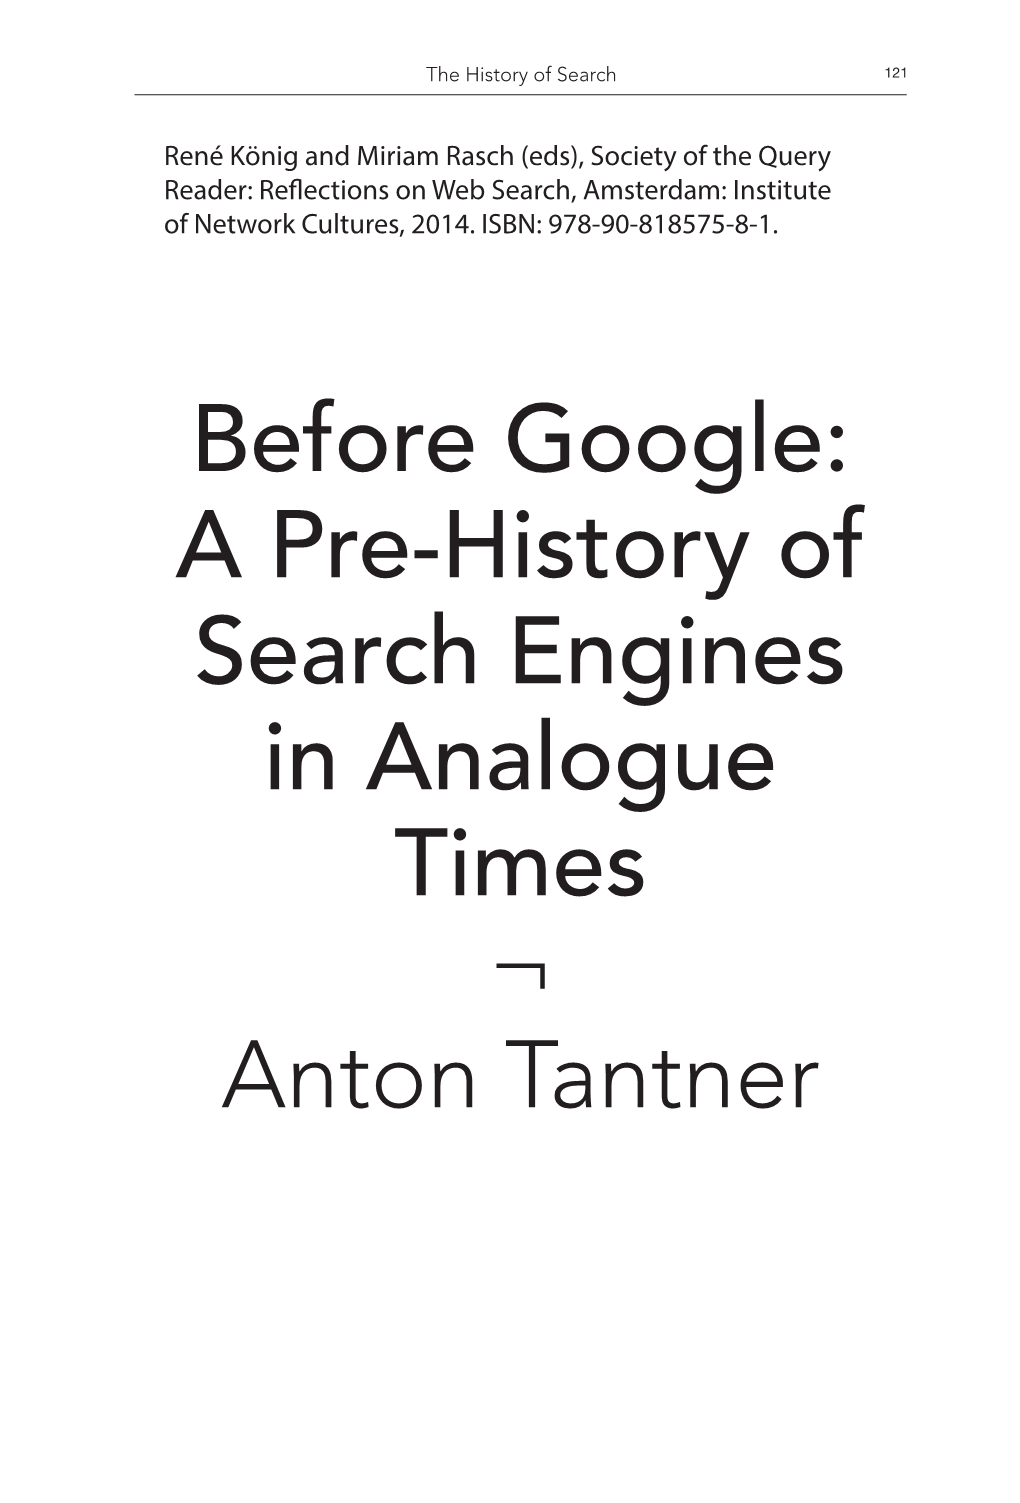 Before Google: a Pre-History of Search Engines in Analogue Times ¬ Anton Tantner 122 Society of the Query Reader